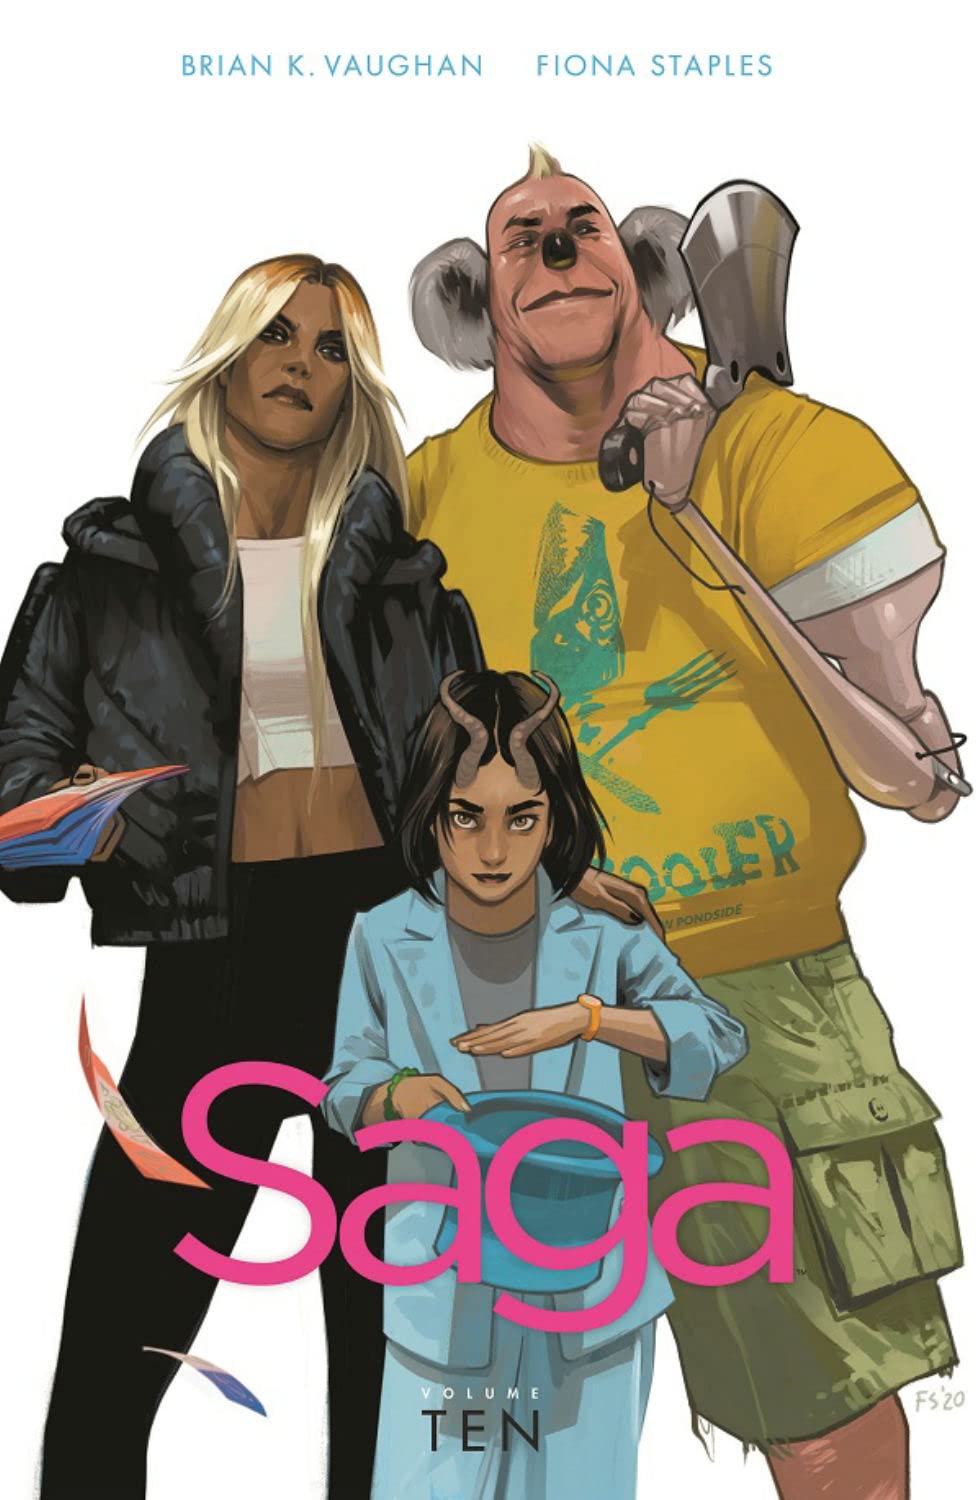 “Saga” by Brian K. Vaughan and Fiona Staples (2012)